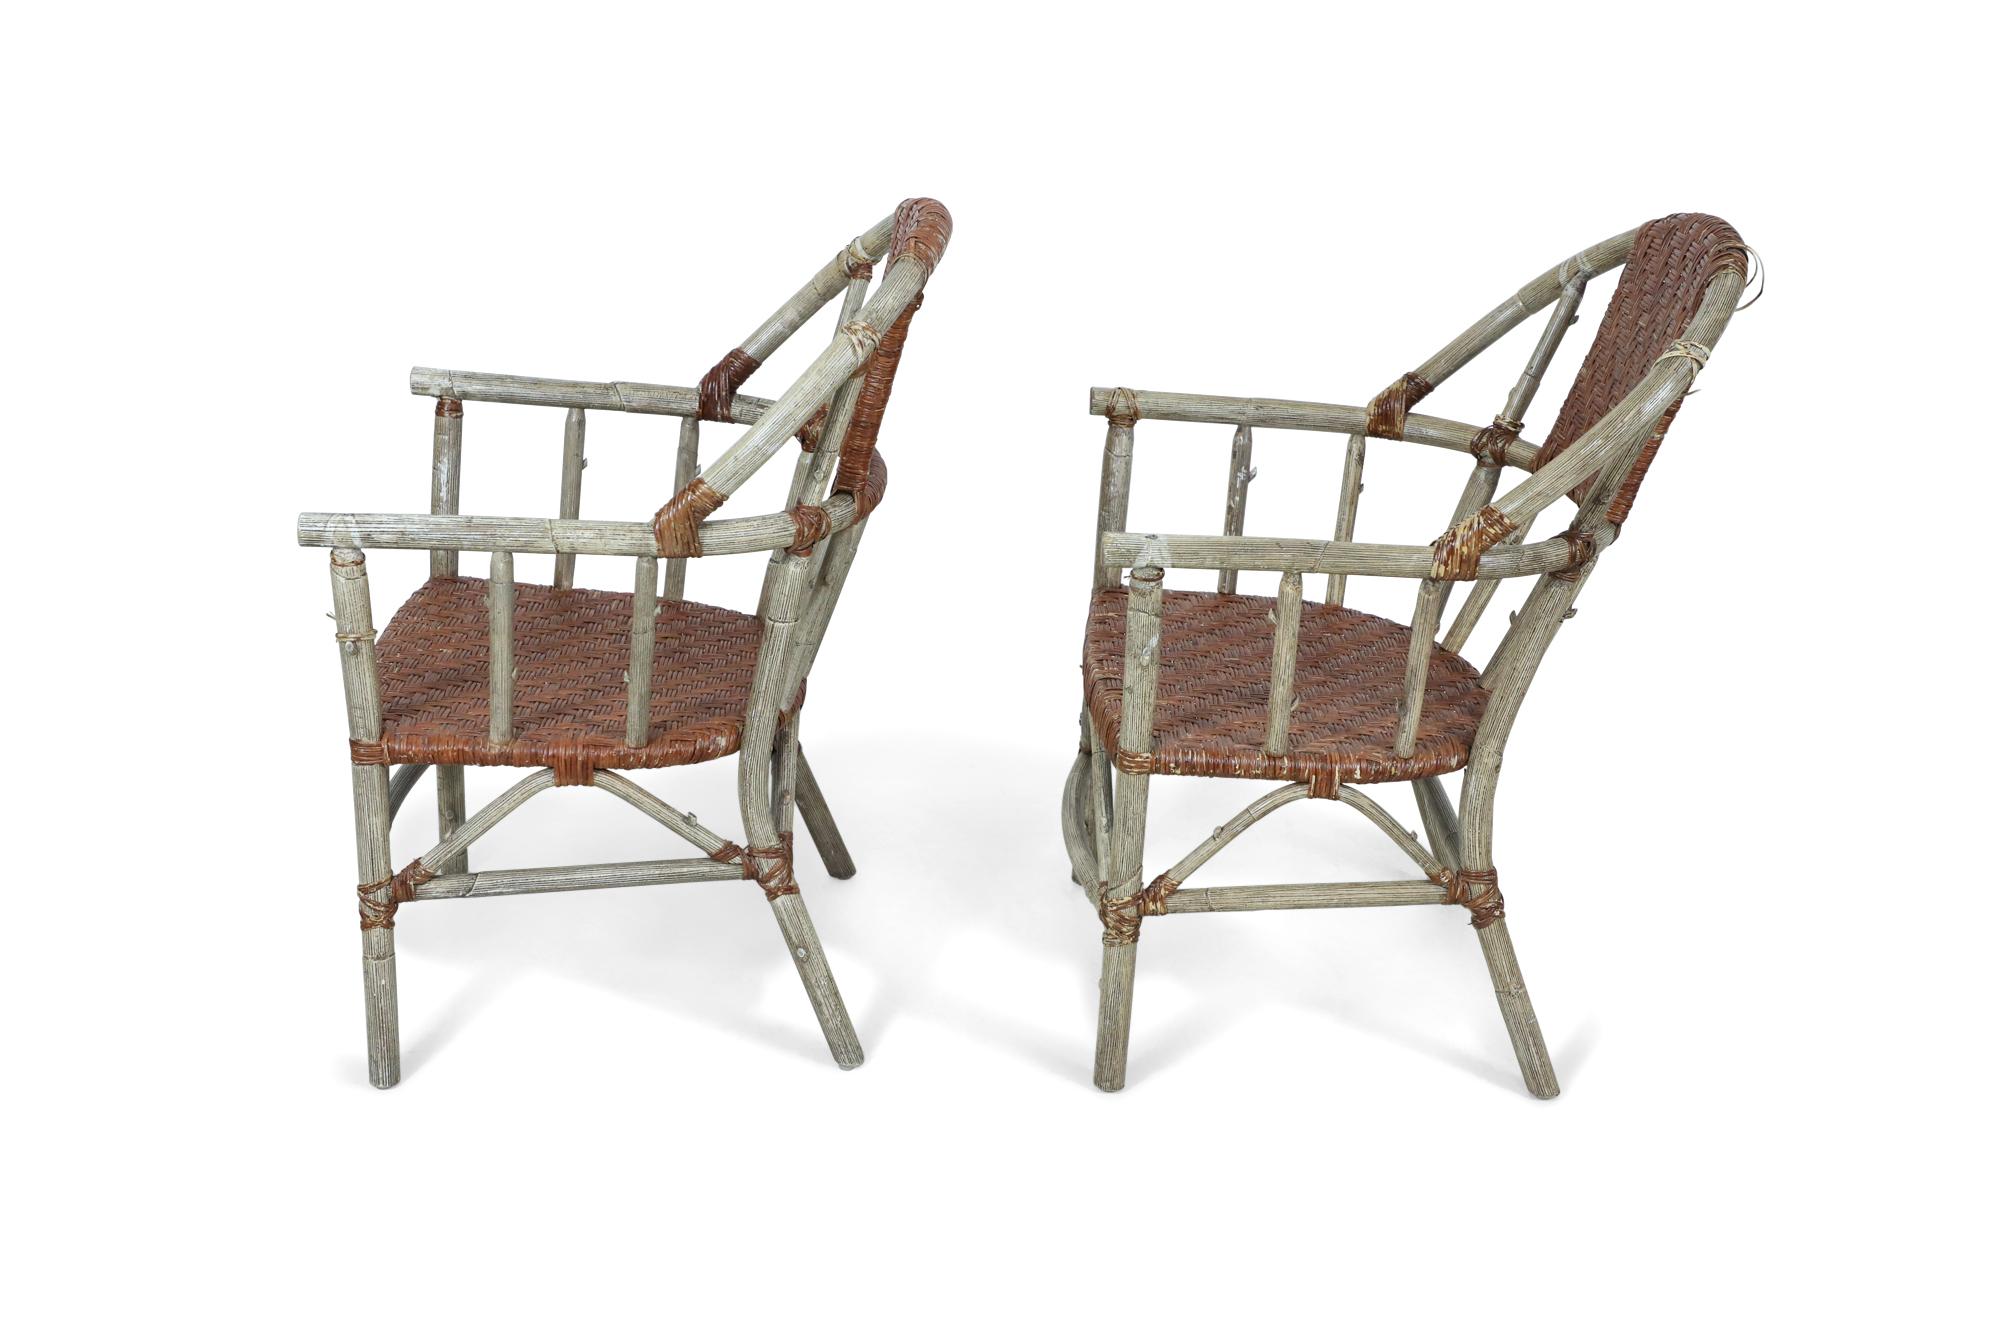 27 American Rustic Old Hickory style (mid-20th Century) faux birch grey painted armchairs having a spindle design back with a woven seat and back panel with rattan trim (Makers mark: PALECEK, SAN FRANCISCO) (priced each) (originally from Old